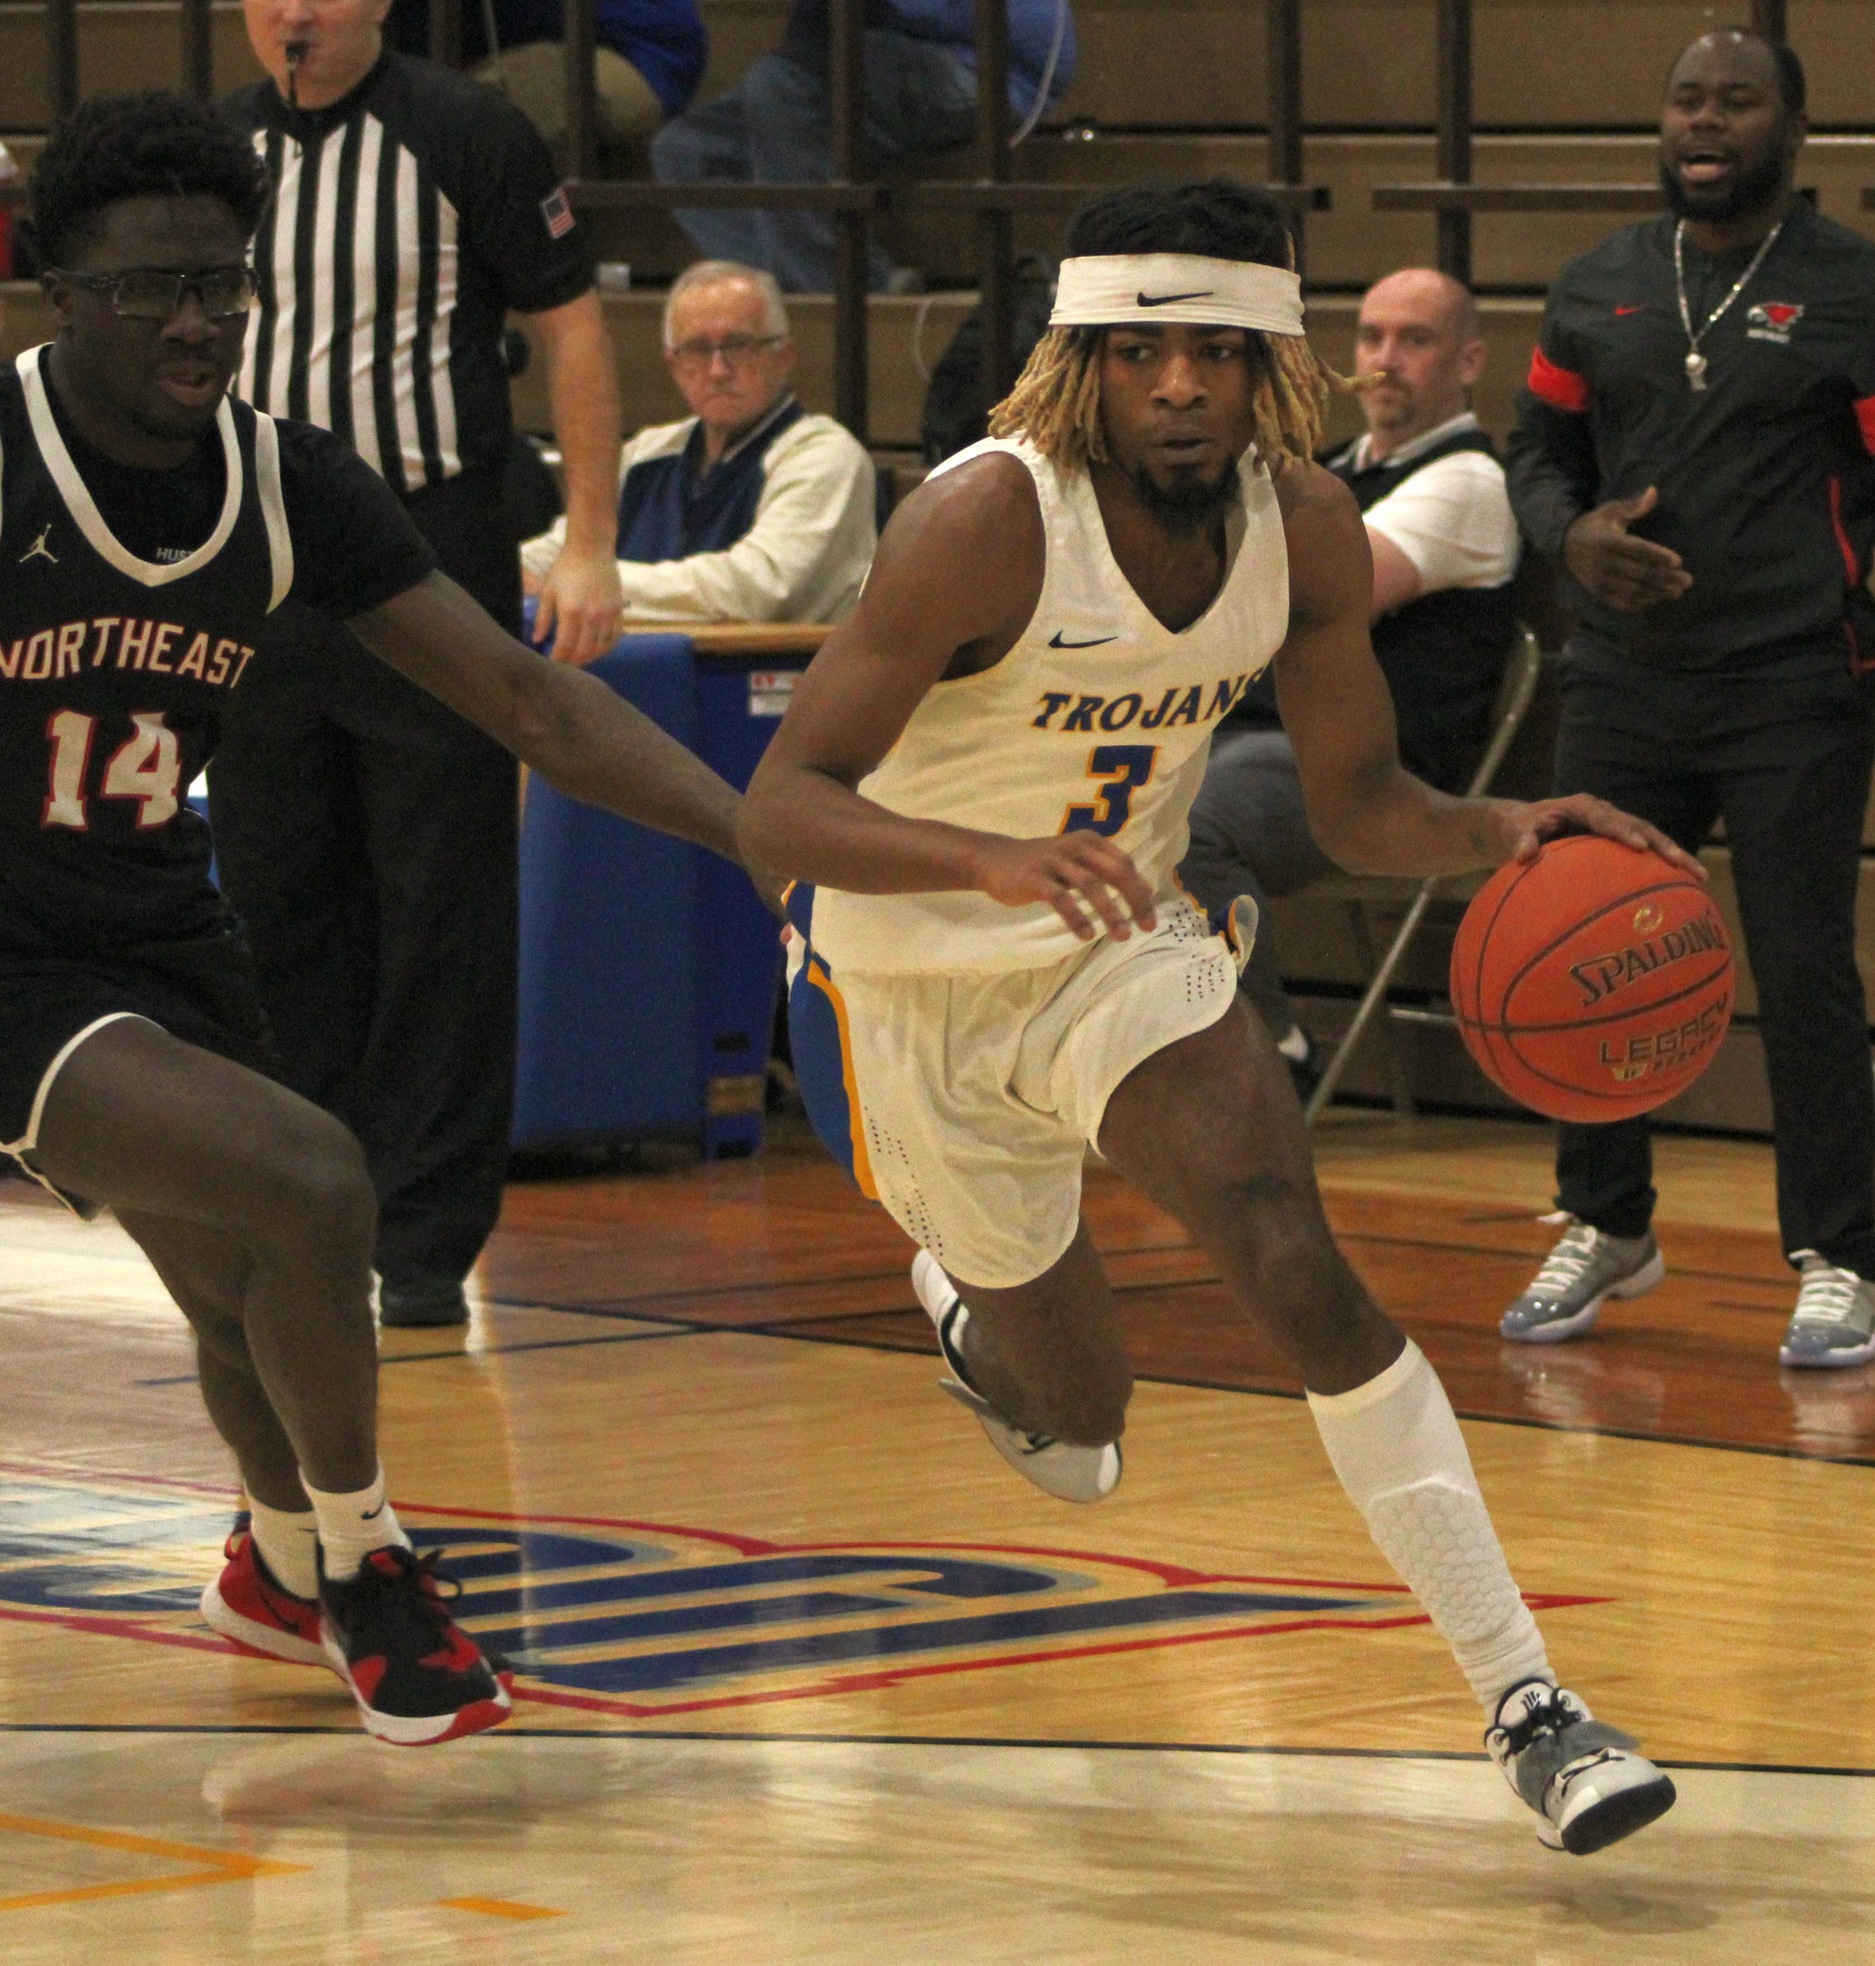 NIACC's Cortaviaus Seales drives to the basket in first half of Saturday's game against Northeast CC.